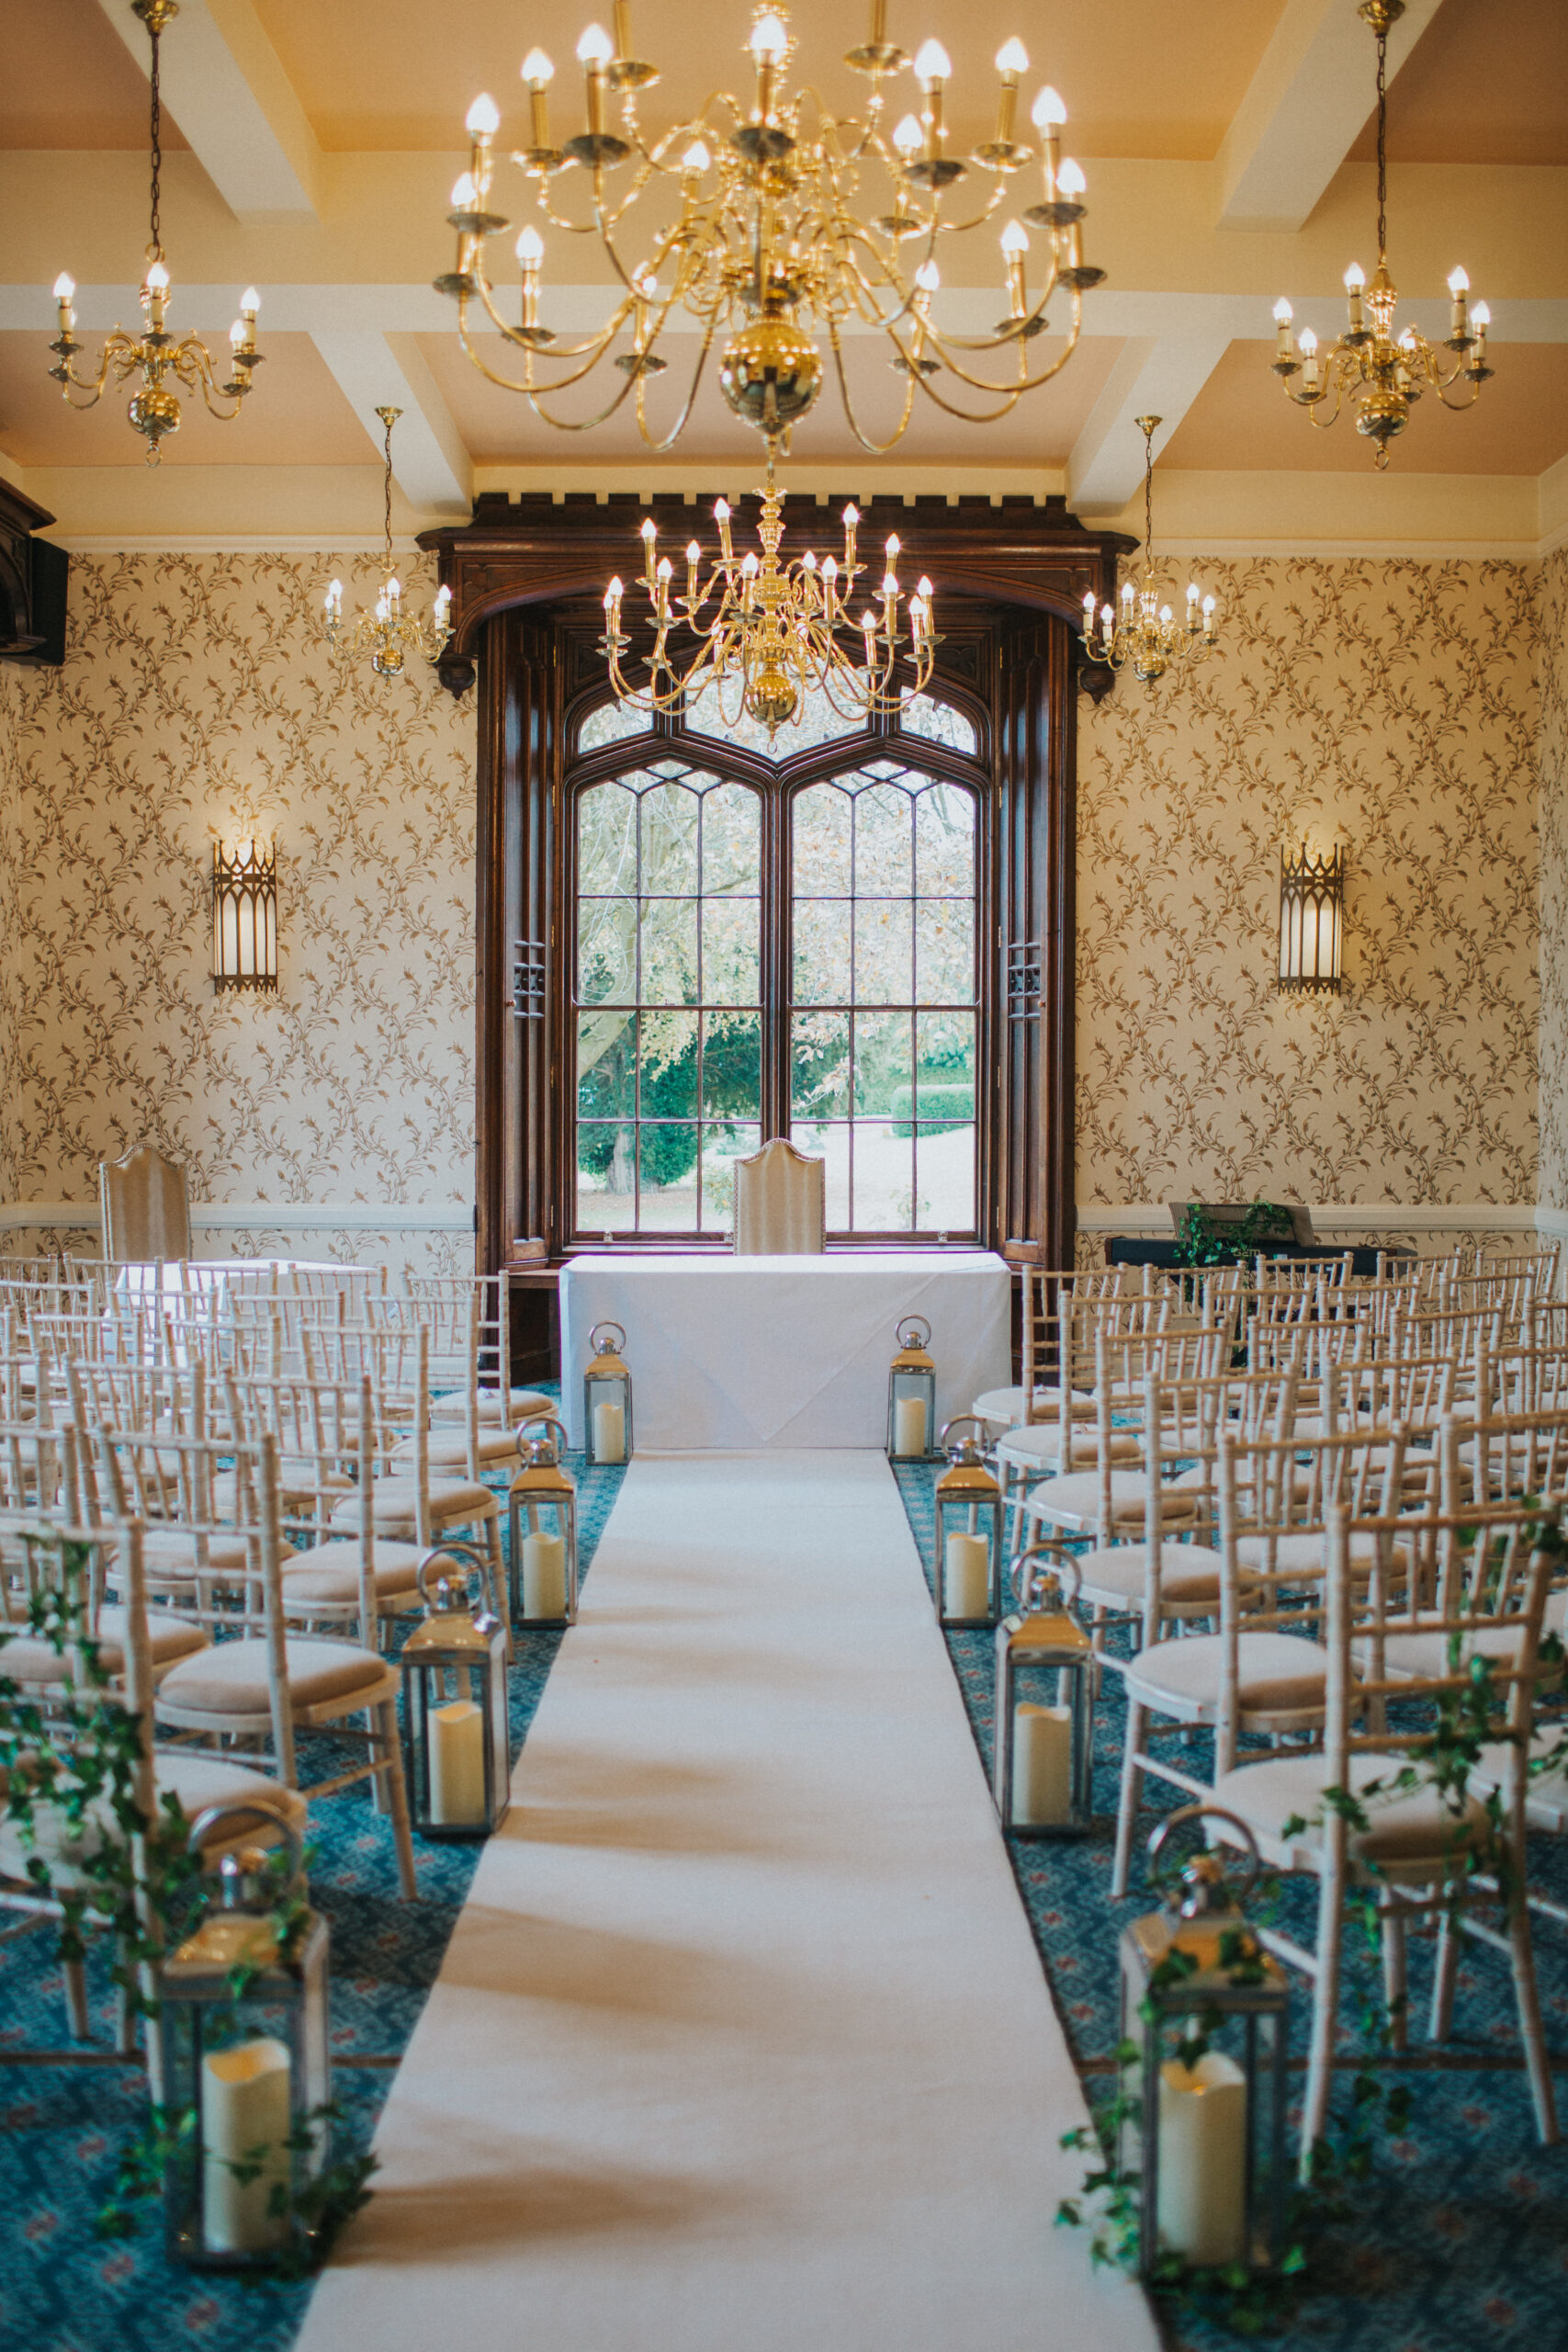 Rustic charm meets autumnal elegance at Rowton Castle